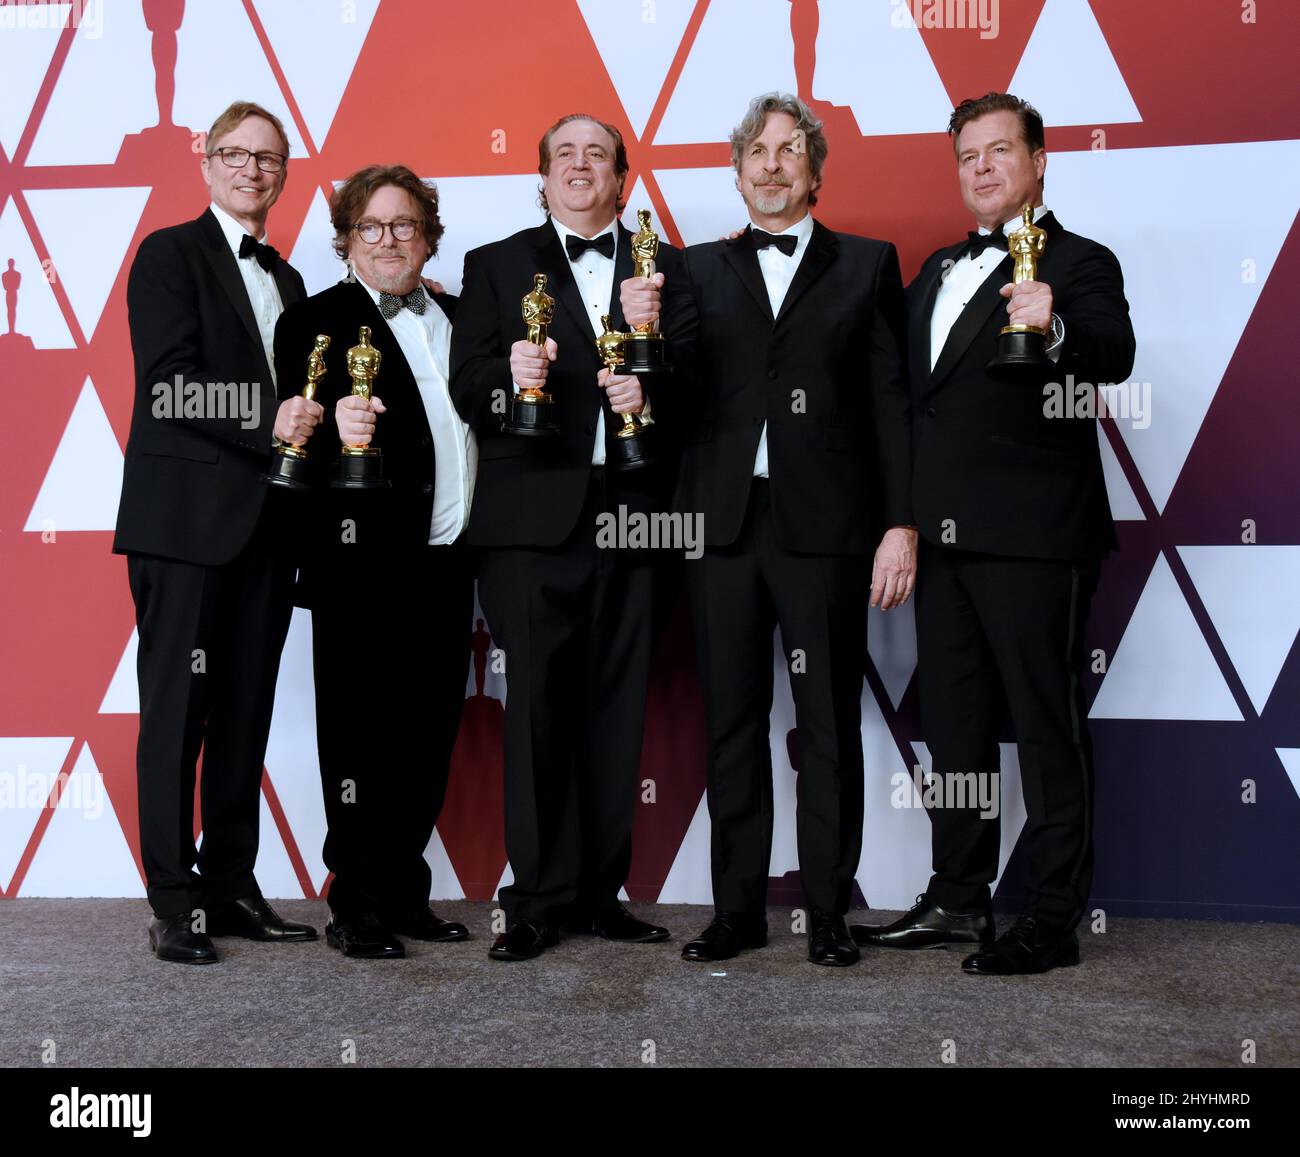 Jim Burke, Charles B. Wessler, Nick Vallelonga, Peter Farrelly, Brian Currie at the '91st Annual Academy Awards' - Press Room held at the Dolby Theatre Stock Photo